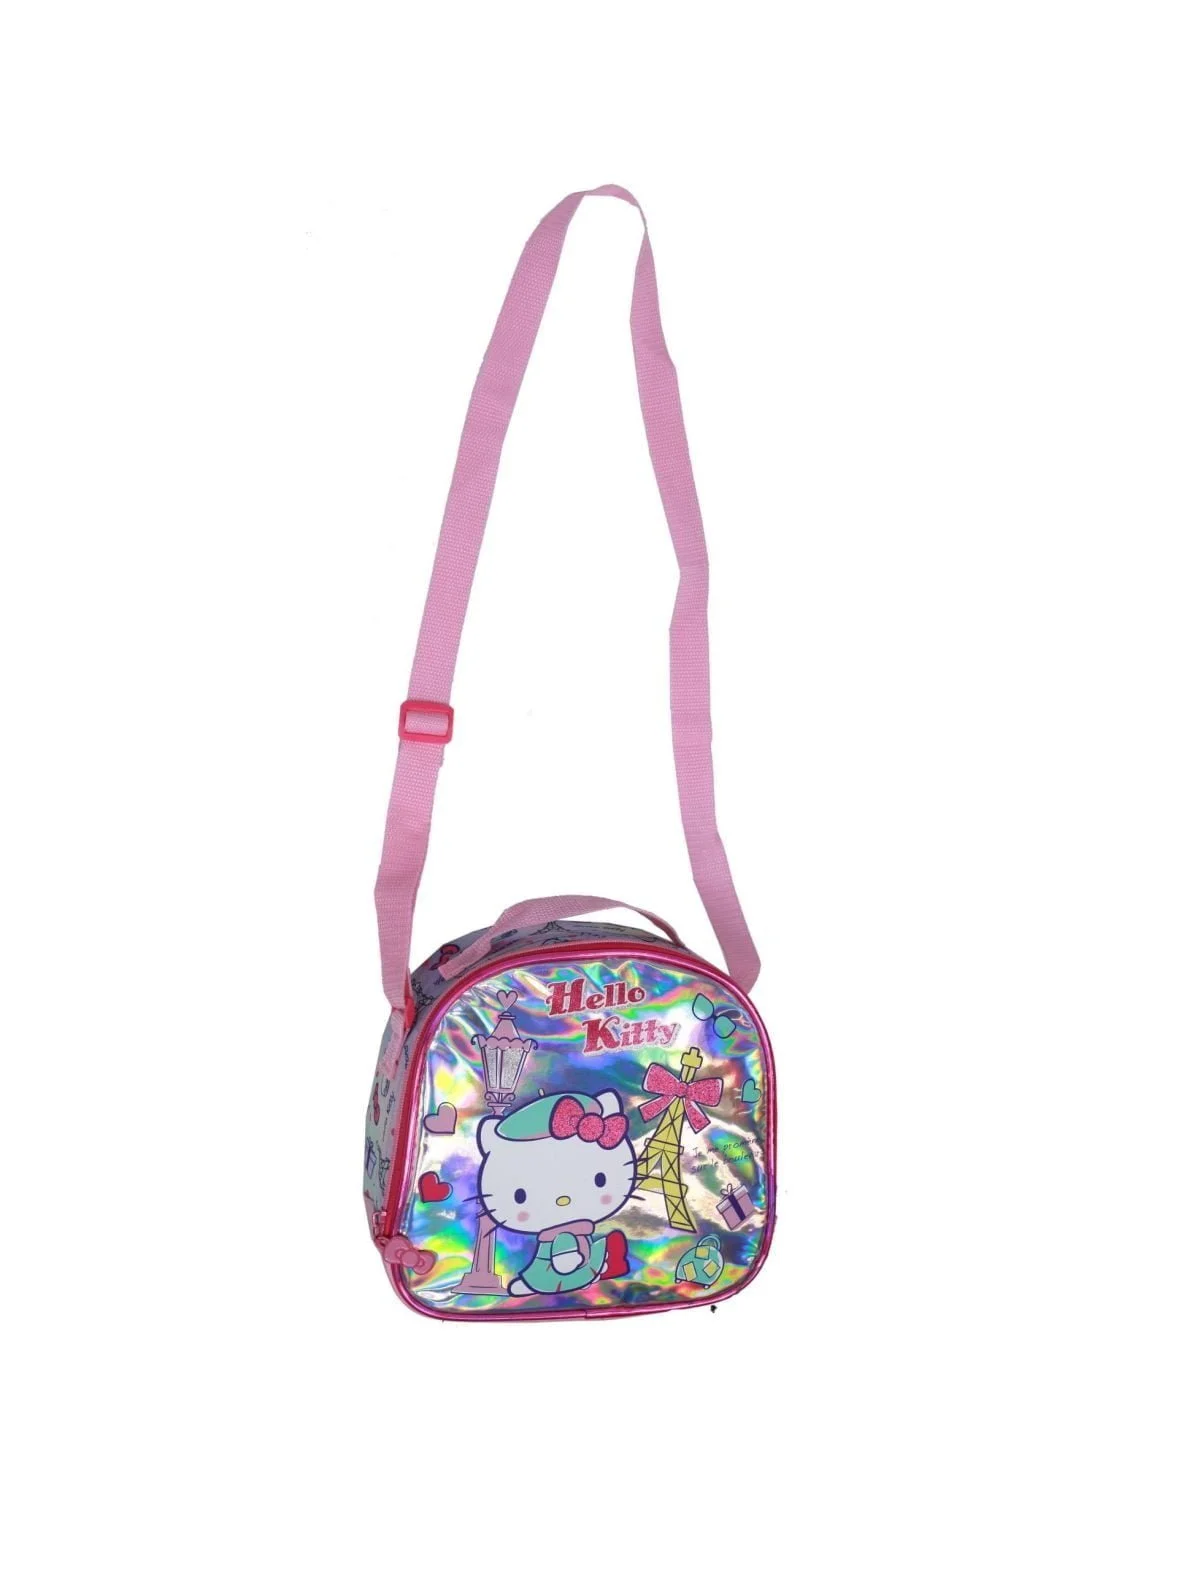 Hk672 230 2 Scaled Make Your Kids  Lunch More Fun By Using This Stylish Lunch Bag. This Spacious Bag Can Fit Most Standard Sized Lunch Boxes. Add More Flavor And Become The Center Of Attraction When You Take Out This Bag. &Amp;Lt;Ul&Amp;Gt; &Amp;Lt;Li&Amp;Gt;Stylish Lunch Bag&Amp;Lt;/Li&Amp;Gt; &Amp;Lt;Li&Amp;Gt;Spacious&Amp;Lt;/Li&Amp;Gt; &Amp;Lt;Li&Amp;Gt;Can Fit Most Standard Lunch Boxes&Amp;Lt;/Li&Amp;Gt; &Amp;Lt;/Ul&Amp;Gt; Lunch Bag Hello Kitty Insulated Lunch Bag (Hk672)